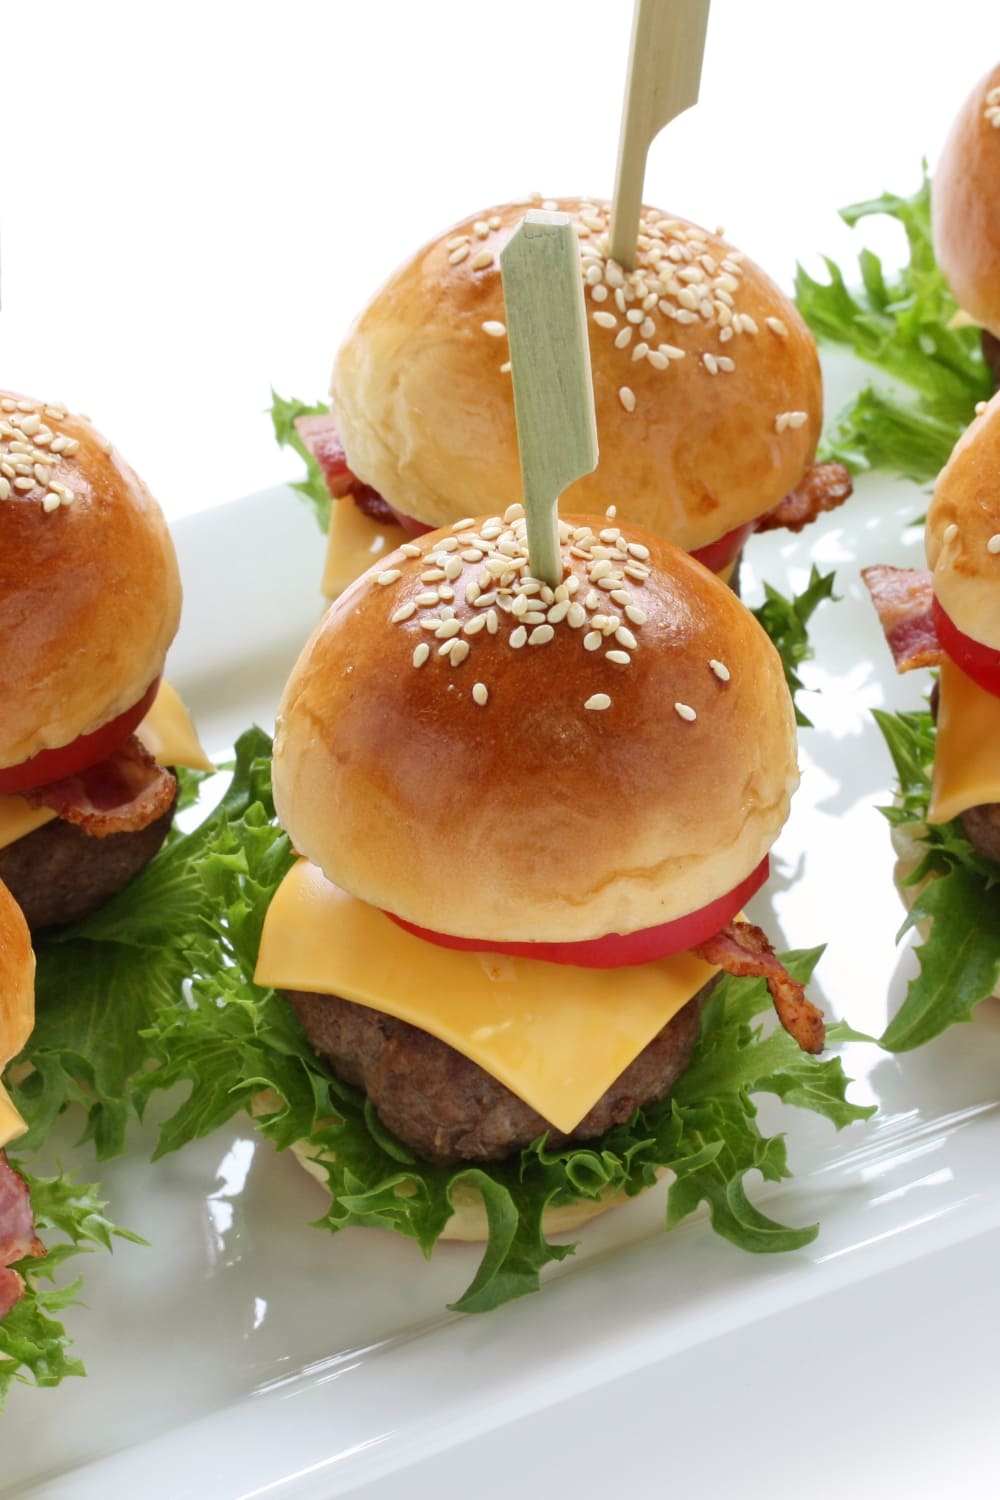 Hamburger Sliders With Thick Patty, Fresh Lettuce, Bacon Strips, Tomato and Cheese Slices, Buns Sprinkles With Sesame Seeds 